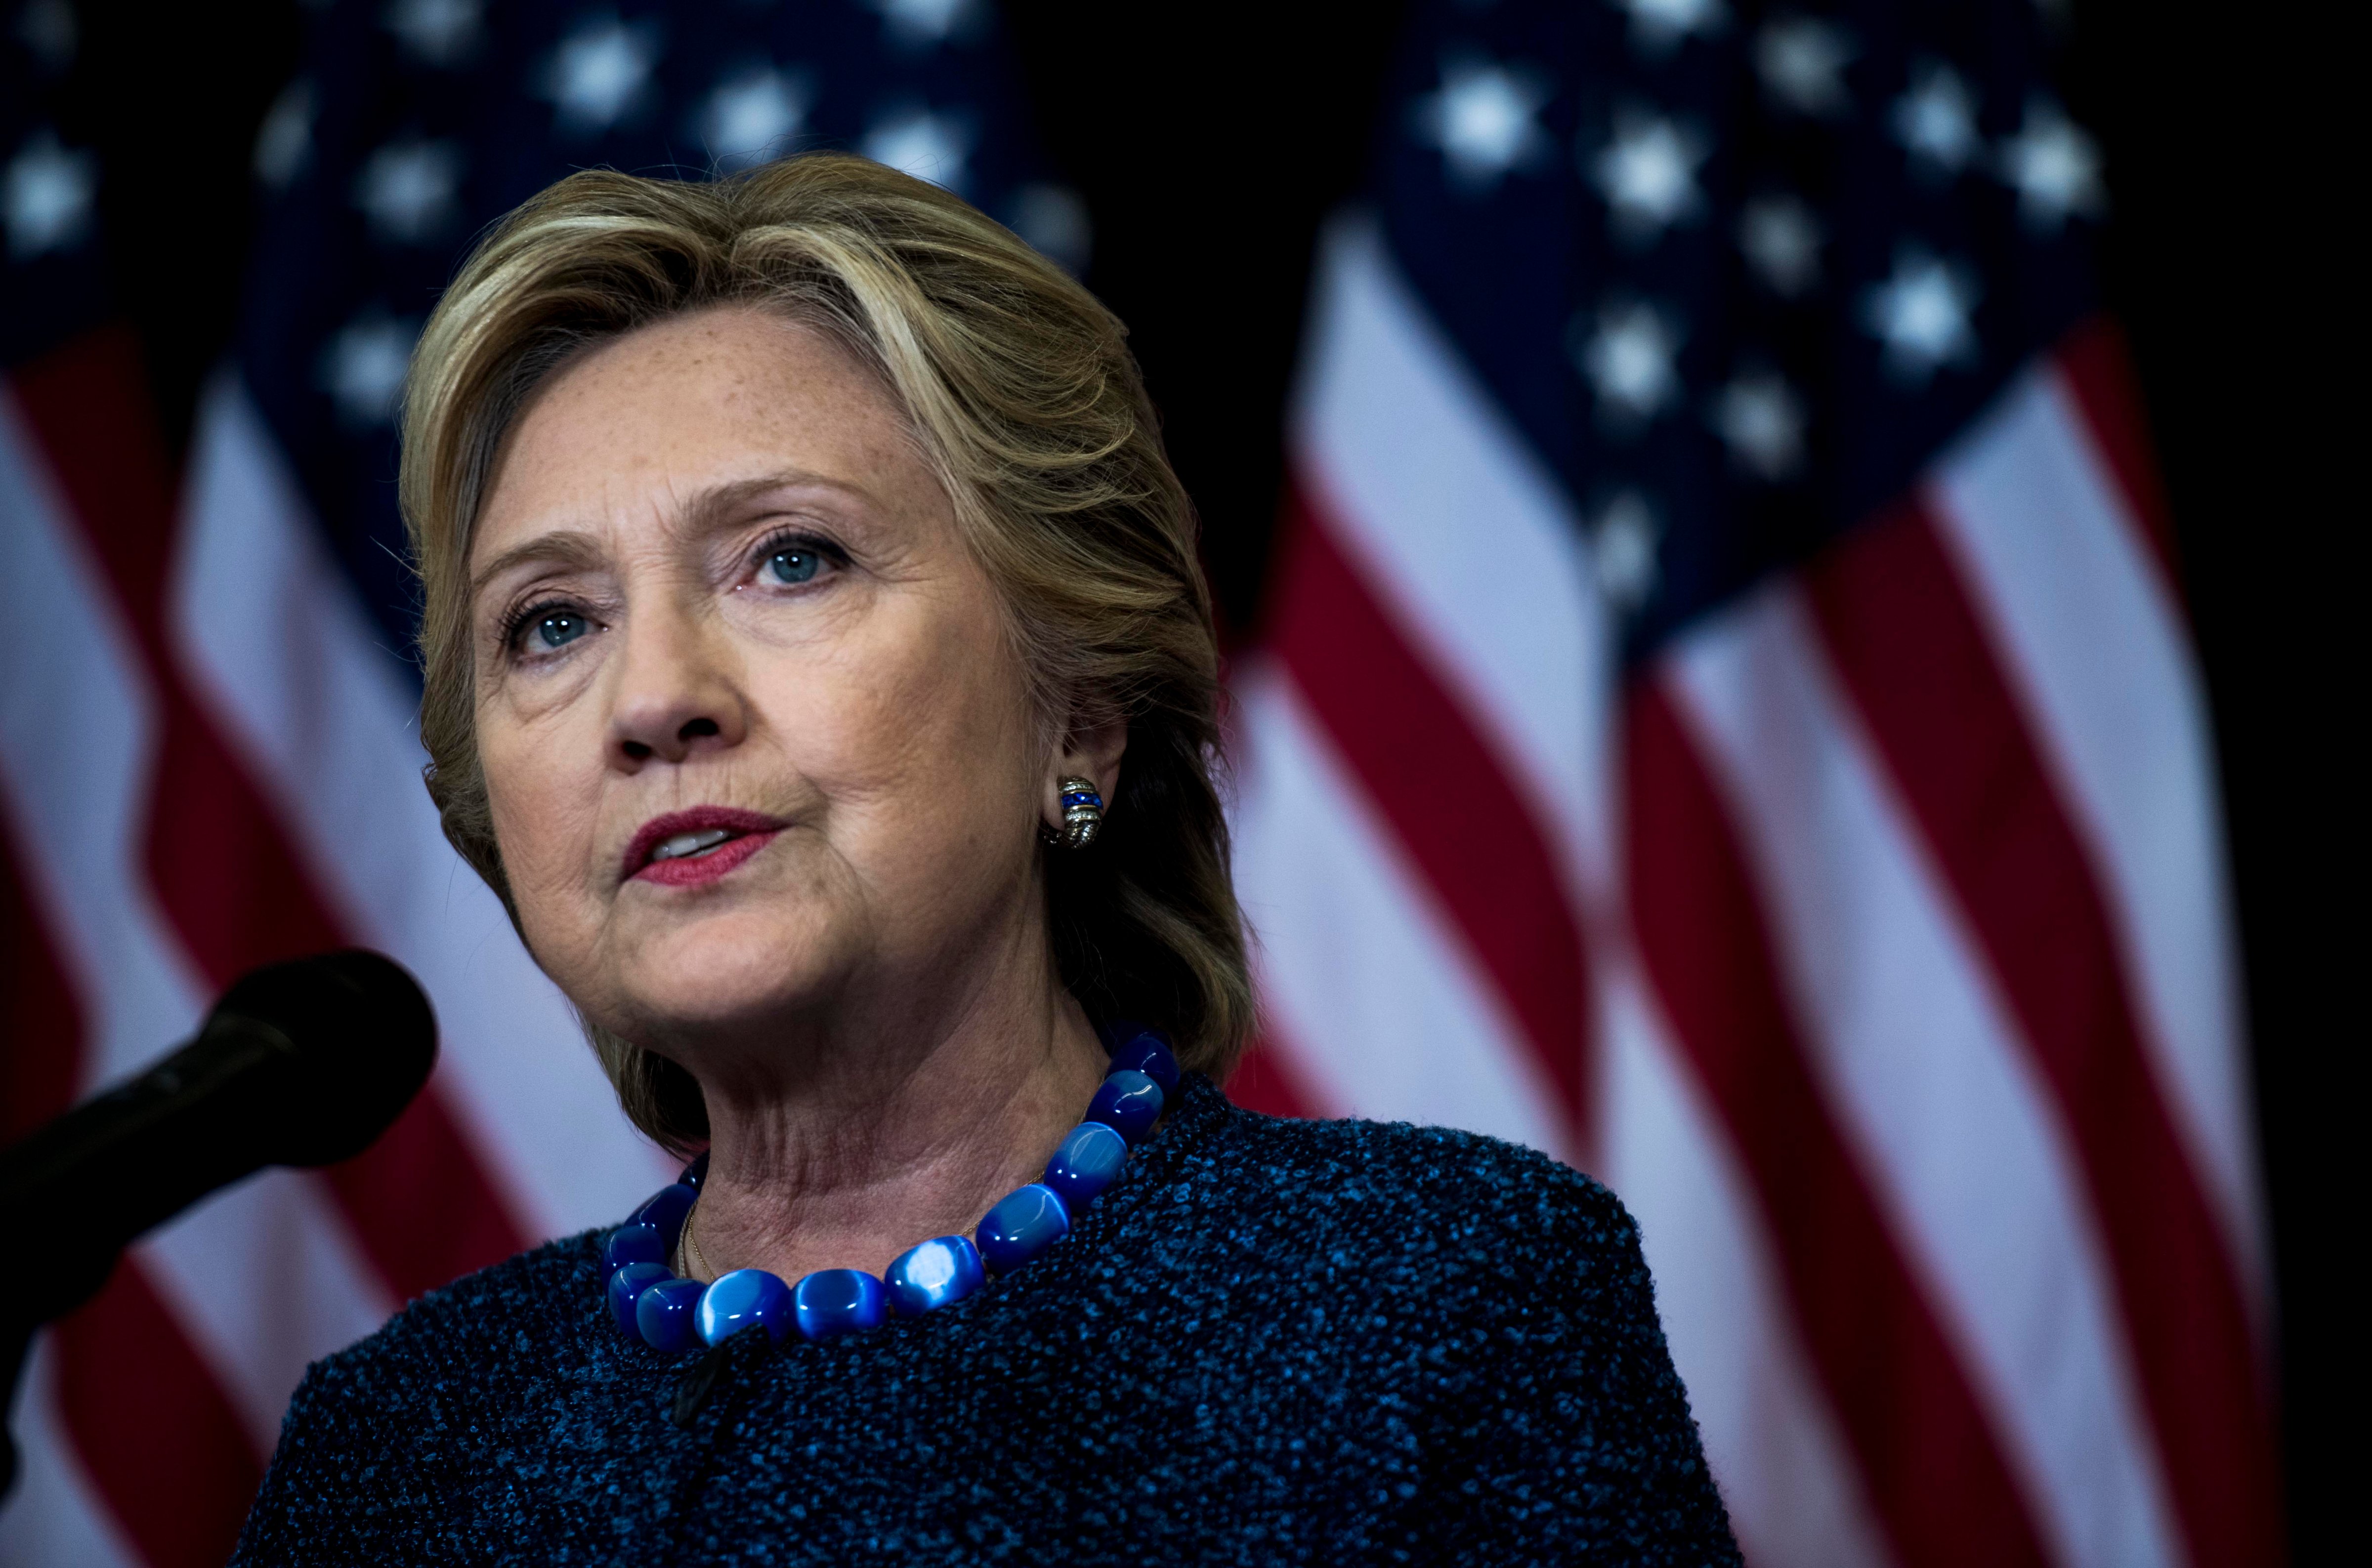 Former Democratic candidate for President of the United States Hillary Clinton speaks to journalists to comment on the FBI investigation concerning Clinton's private emails, Oct. 28, 2016. (Melina Mara—The Washington Post/Getty Images)